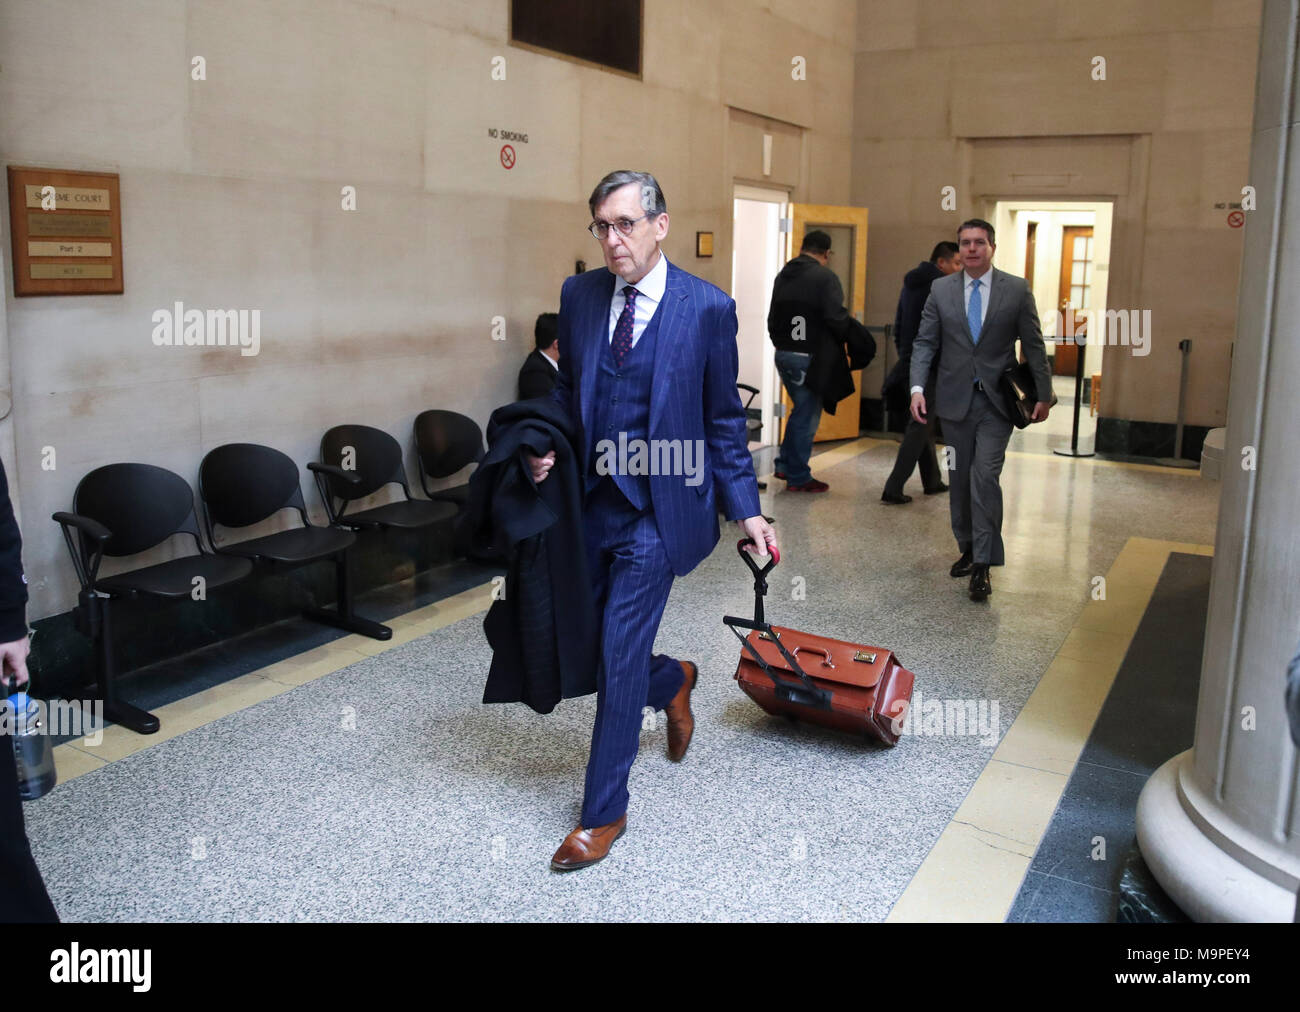 Nassau County, USA. 27th Mar, 2018. Chinese comedian Zhou Libo's lawyer Stephen Scaring (C) walks to a courtroom for the second preliminary hearing in Nassau County Court in Nassau County, New York, the United States, March 27, 2018. The Nassau County Court in New York in eastern coast state of New York on Monday resumed preliminary hearing of the case of Chinese comedian Zhou Libo, who is facing weapon and drug charges. With no further witness being summoned, the judge declared the court would resume on May 9. Credit: Wang Ying/Xinhua/Alamy Live News Stock Photo